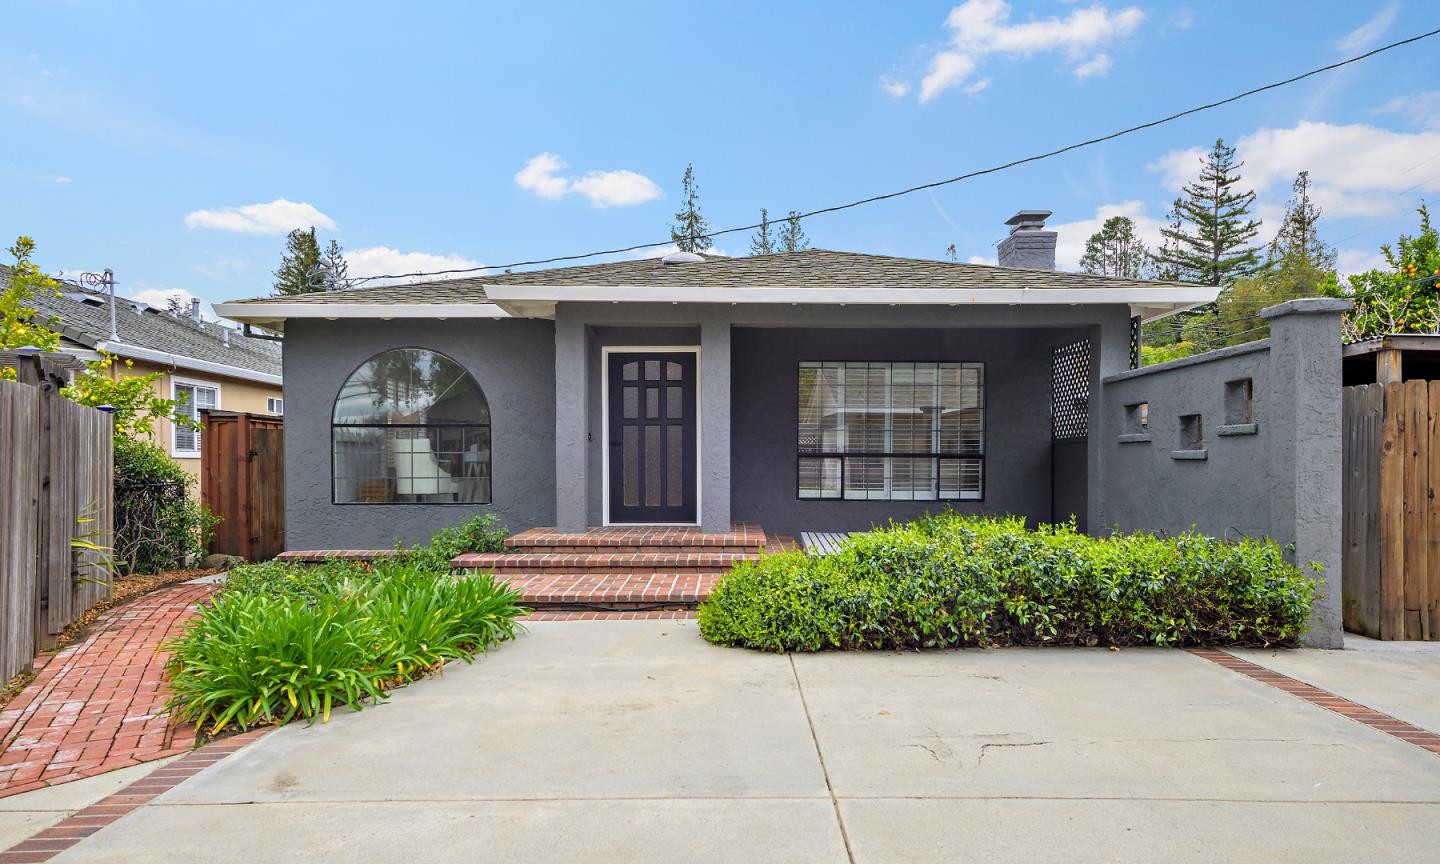 Photo of 51 Fairhaven Ct in Mountain View, CA